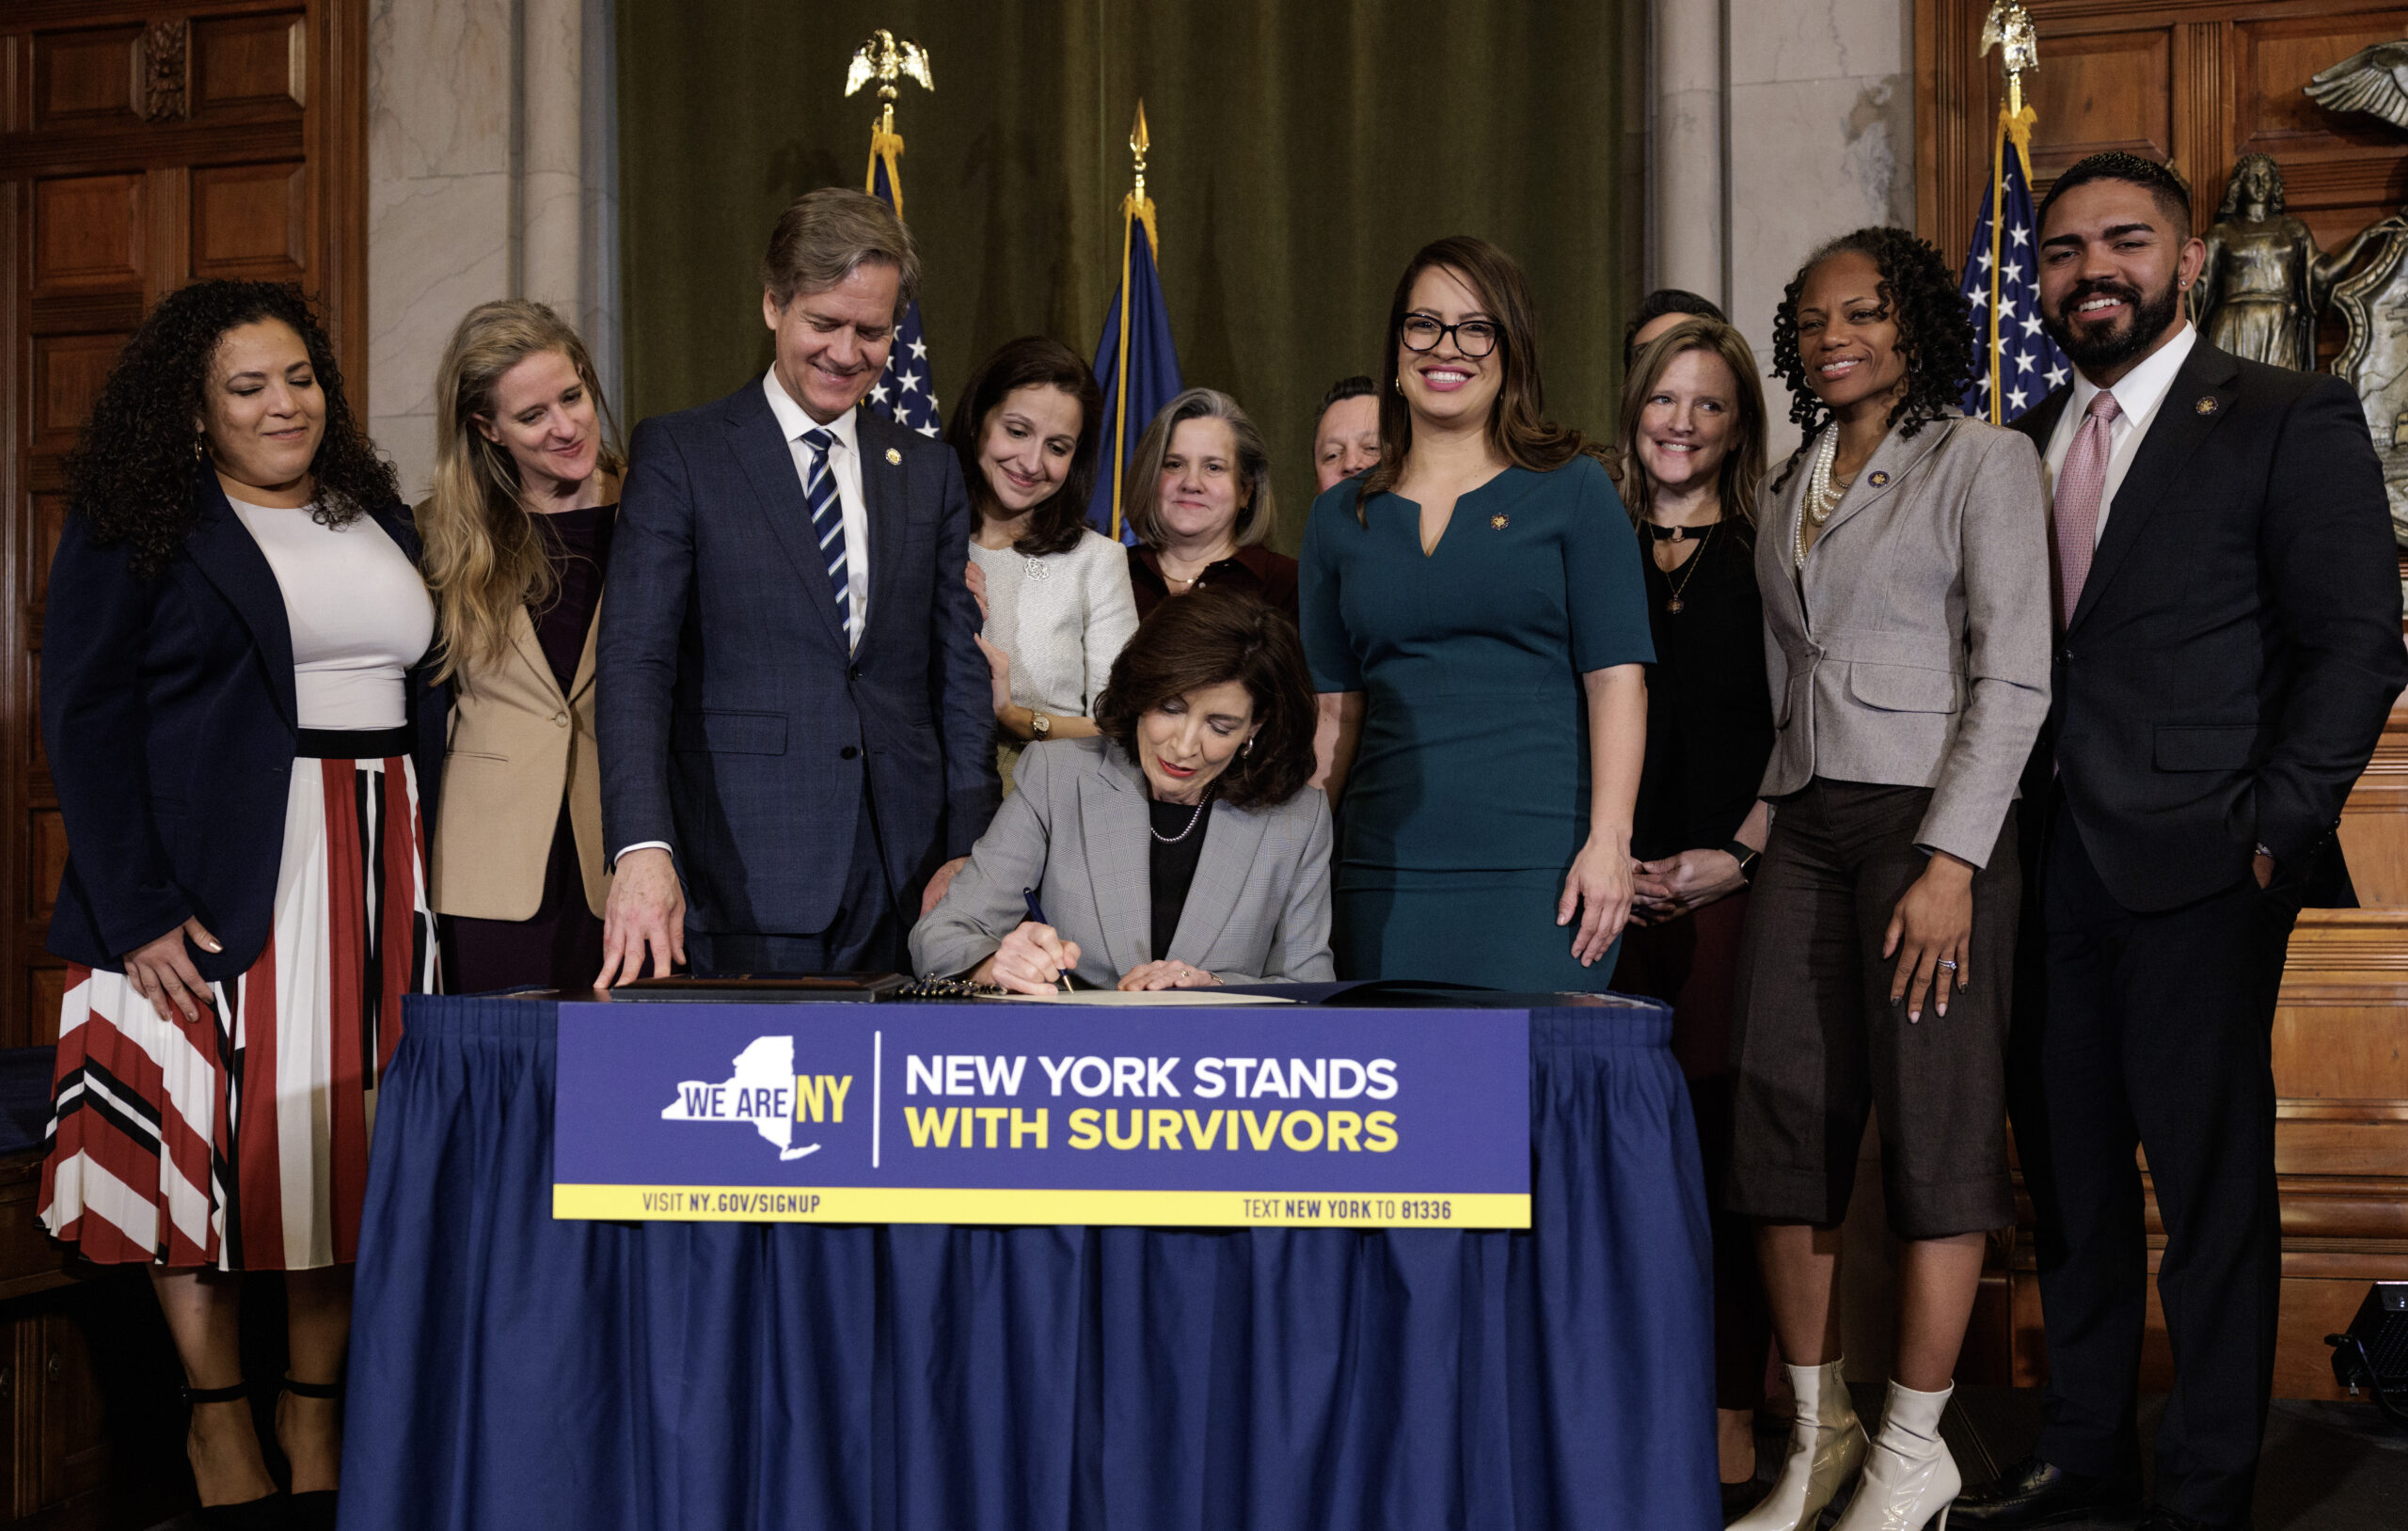 Gov. Kathy Hochul signed the Rape is Rape bill, which will create new protections for survivors.